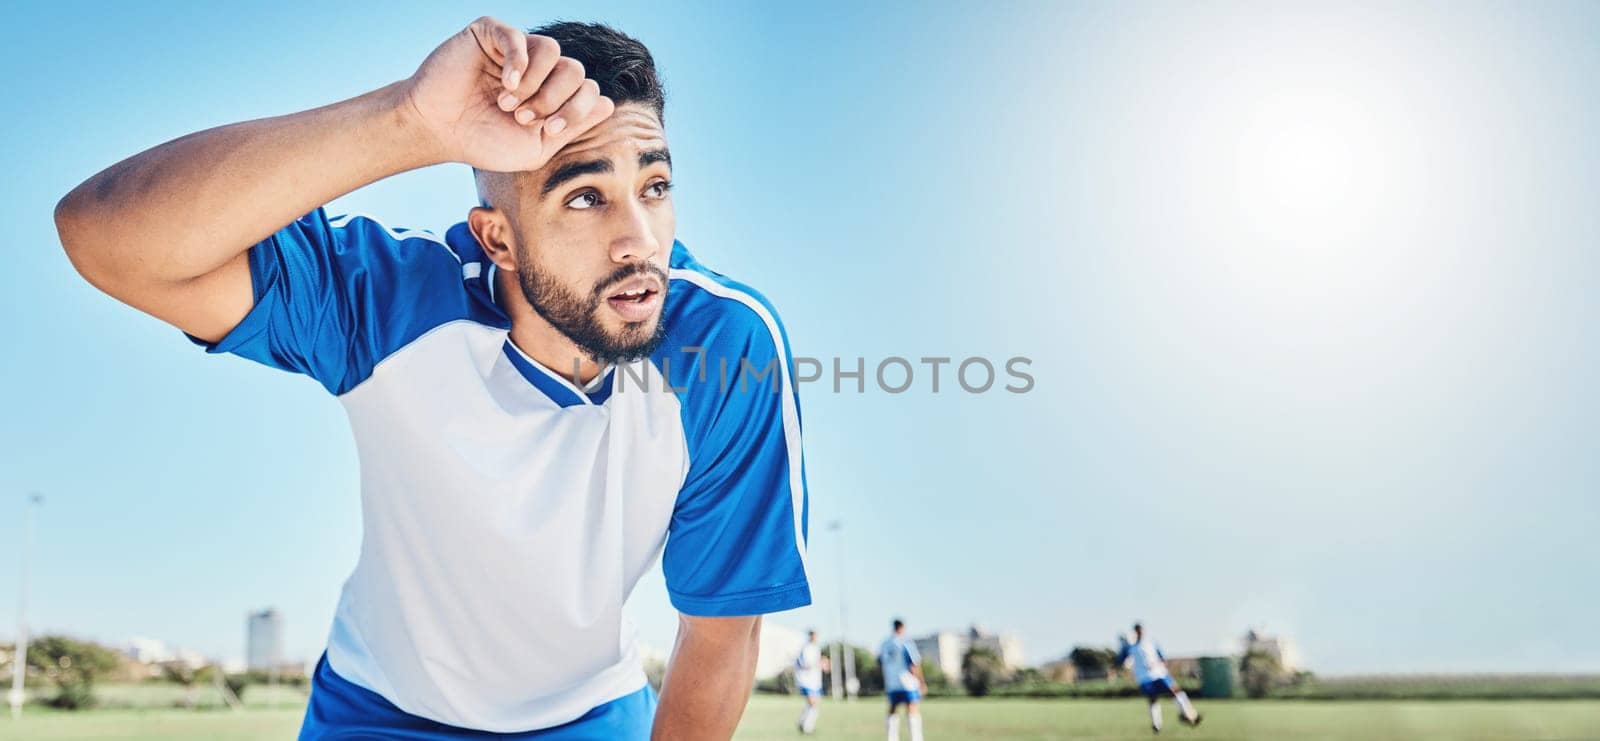 Football player, tired and man sweating outdoor on a field for sports and fitness competition. Male soccer or athlete person on a break while exhausted from training workout with mockup banner space.